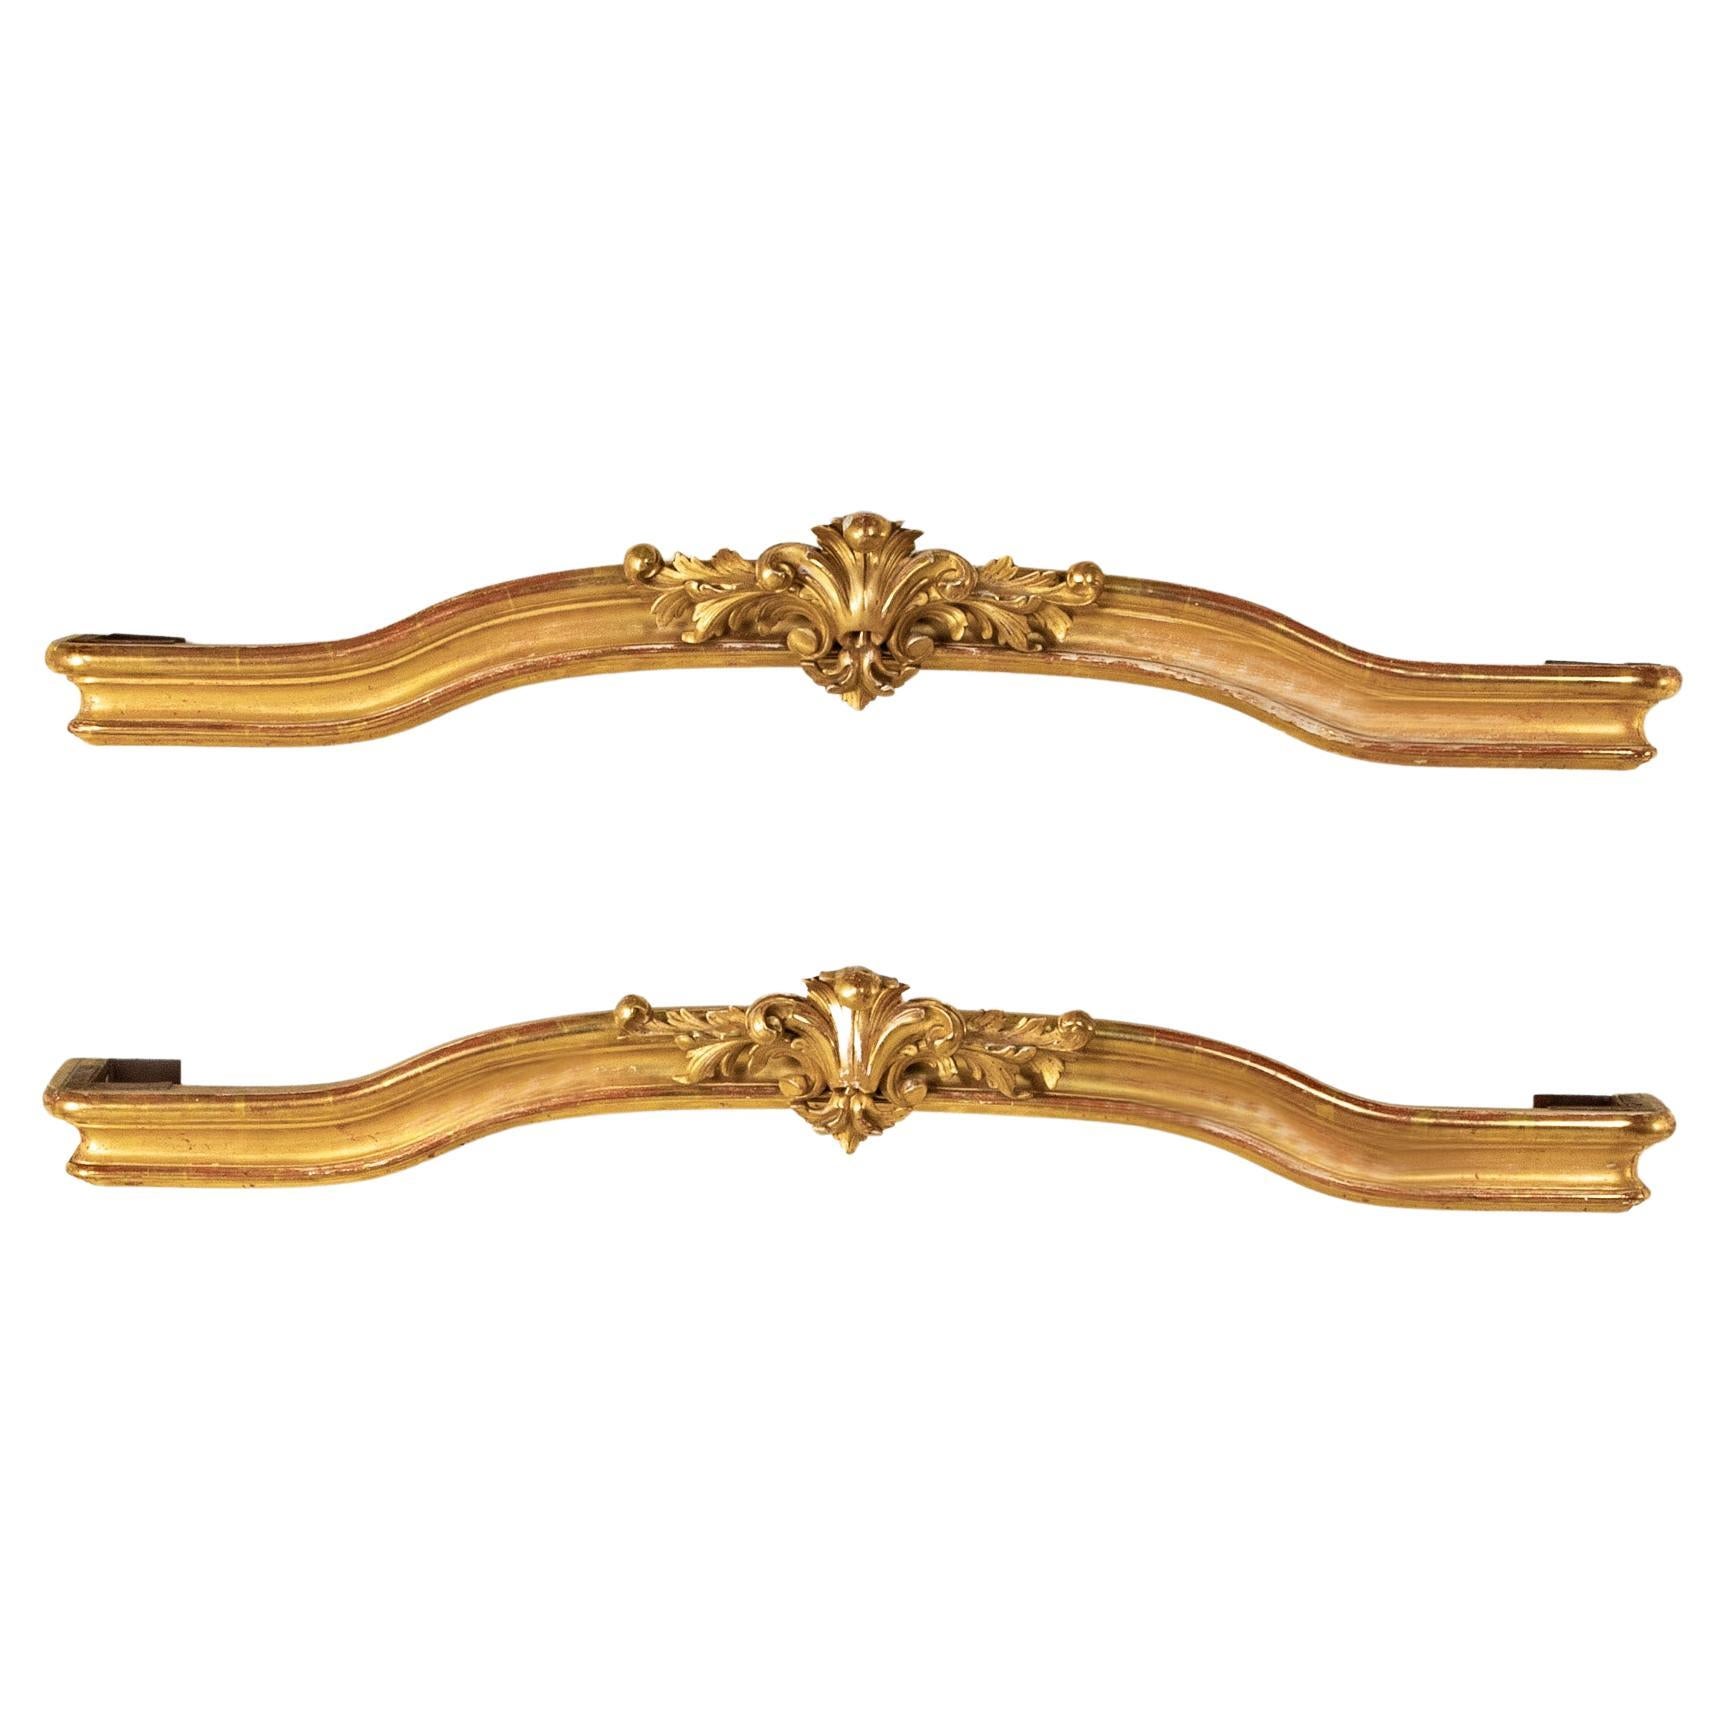 Pair of Mid-19th Century French Regency Style Giltwood Window Cornices, Valances